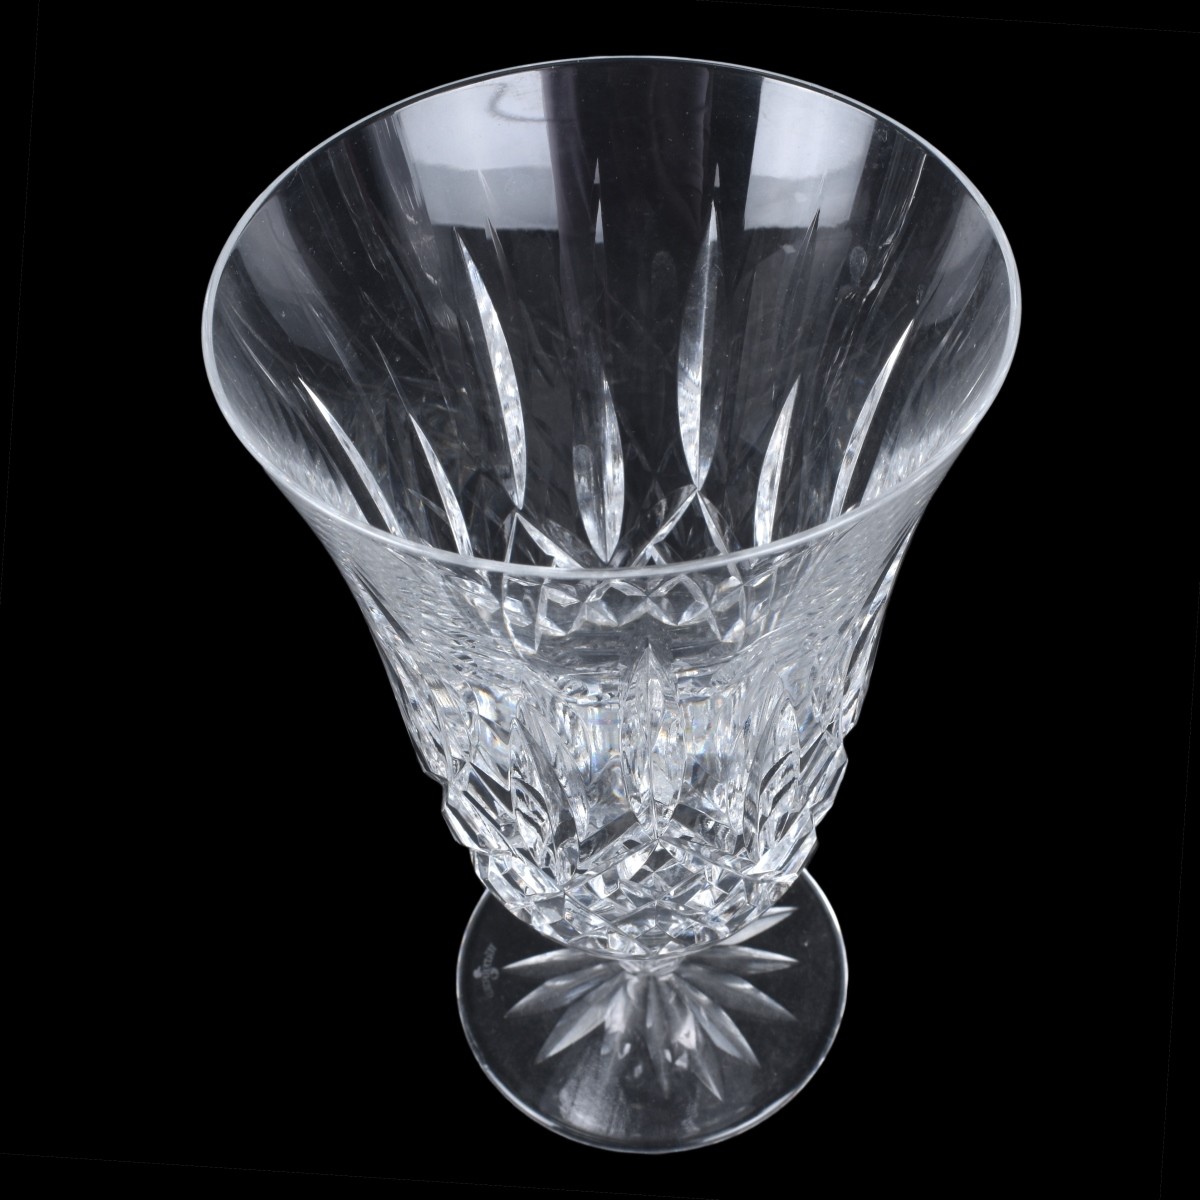 Six (6) Waterford Crystal Glasses